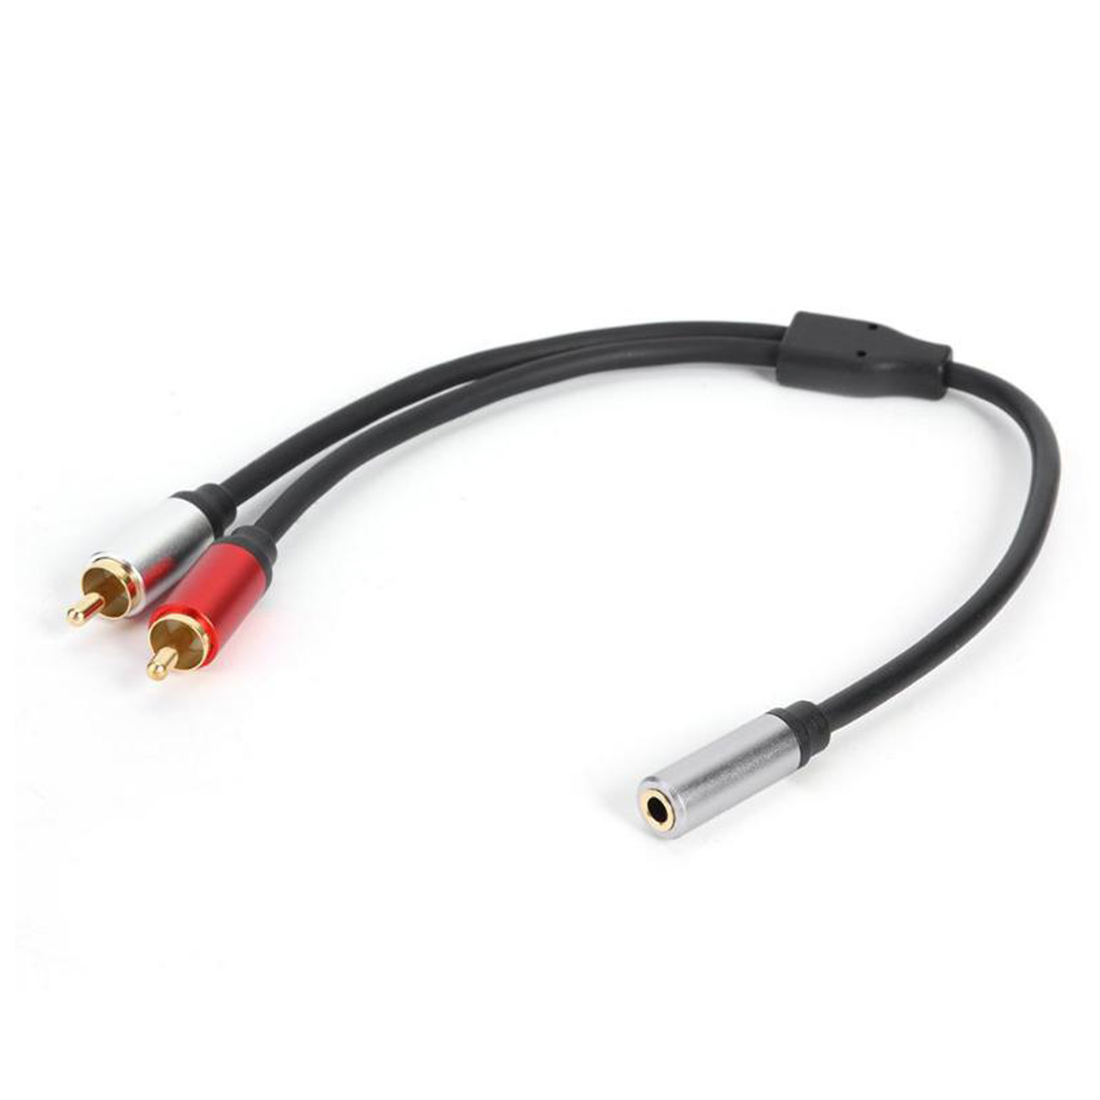 RCA Cable 2RCA Male to 3.5mm Female Audio Aux Cable 3.5mm Jack Rca Cable for MP3 Phone Home Theater DVD 2RCA Audio Cable - image 1 of 5